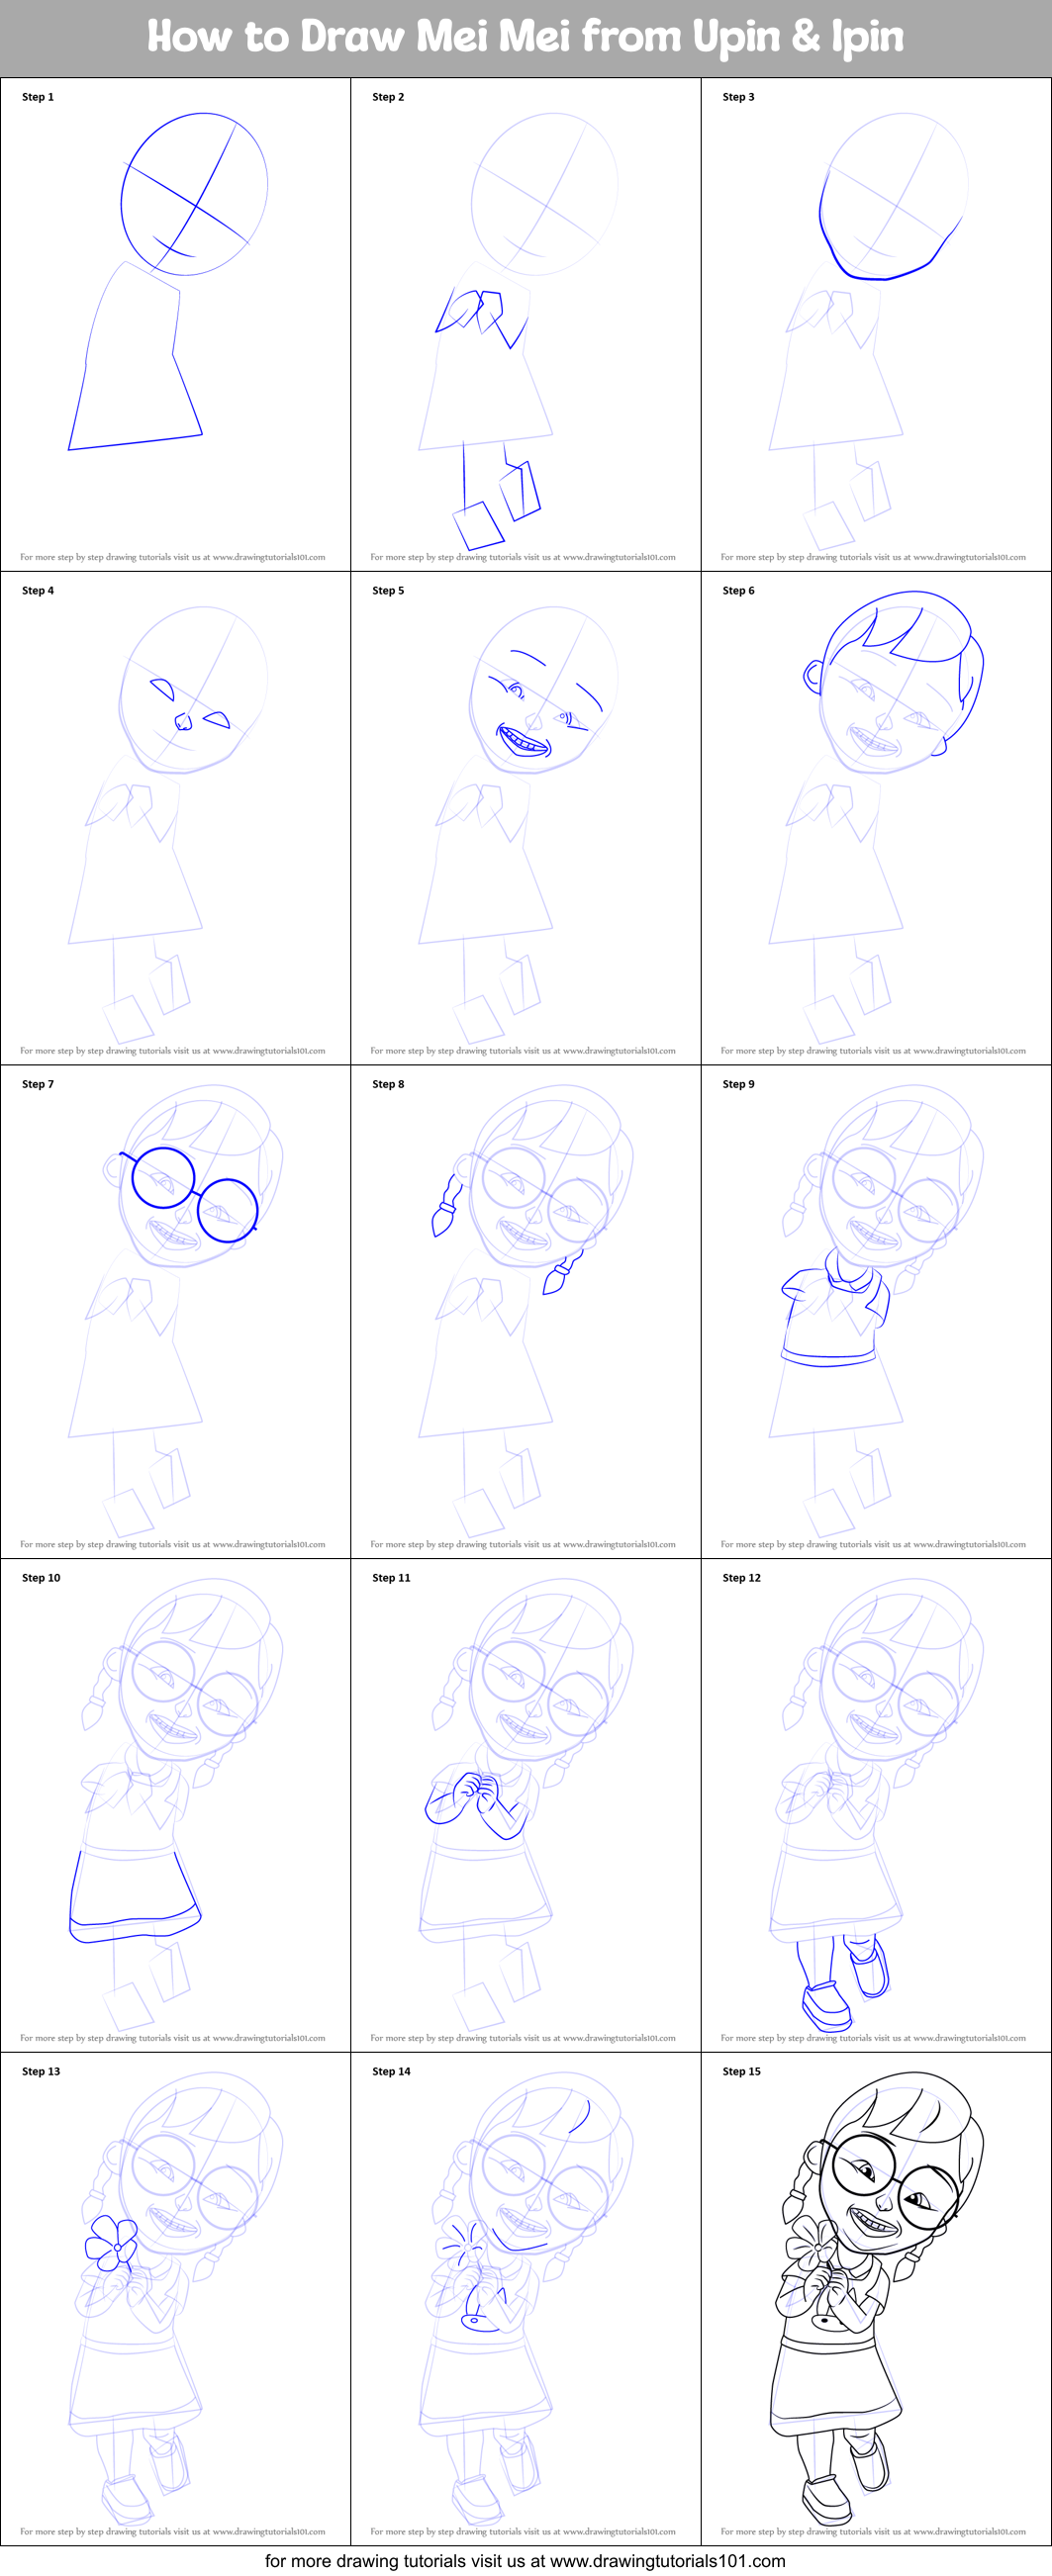 How To Draw Mei Mei From Upin Ipin Printable Step By Step Drawing Sheet Drawingtutorials101 Com